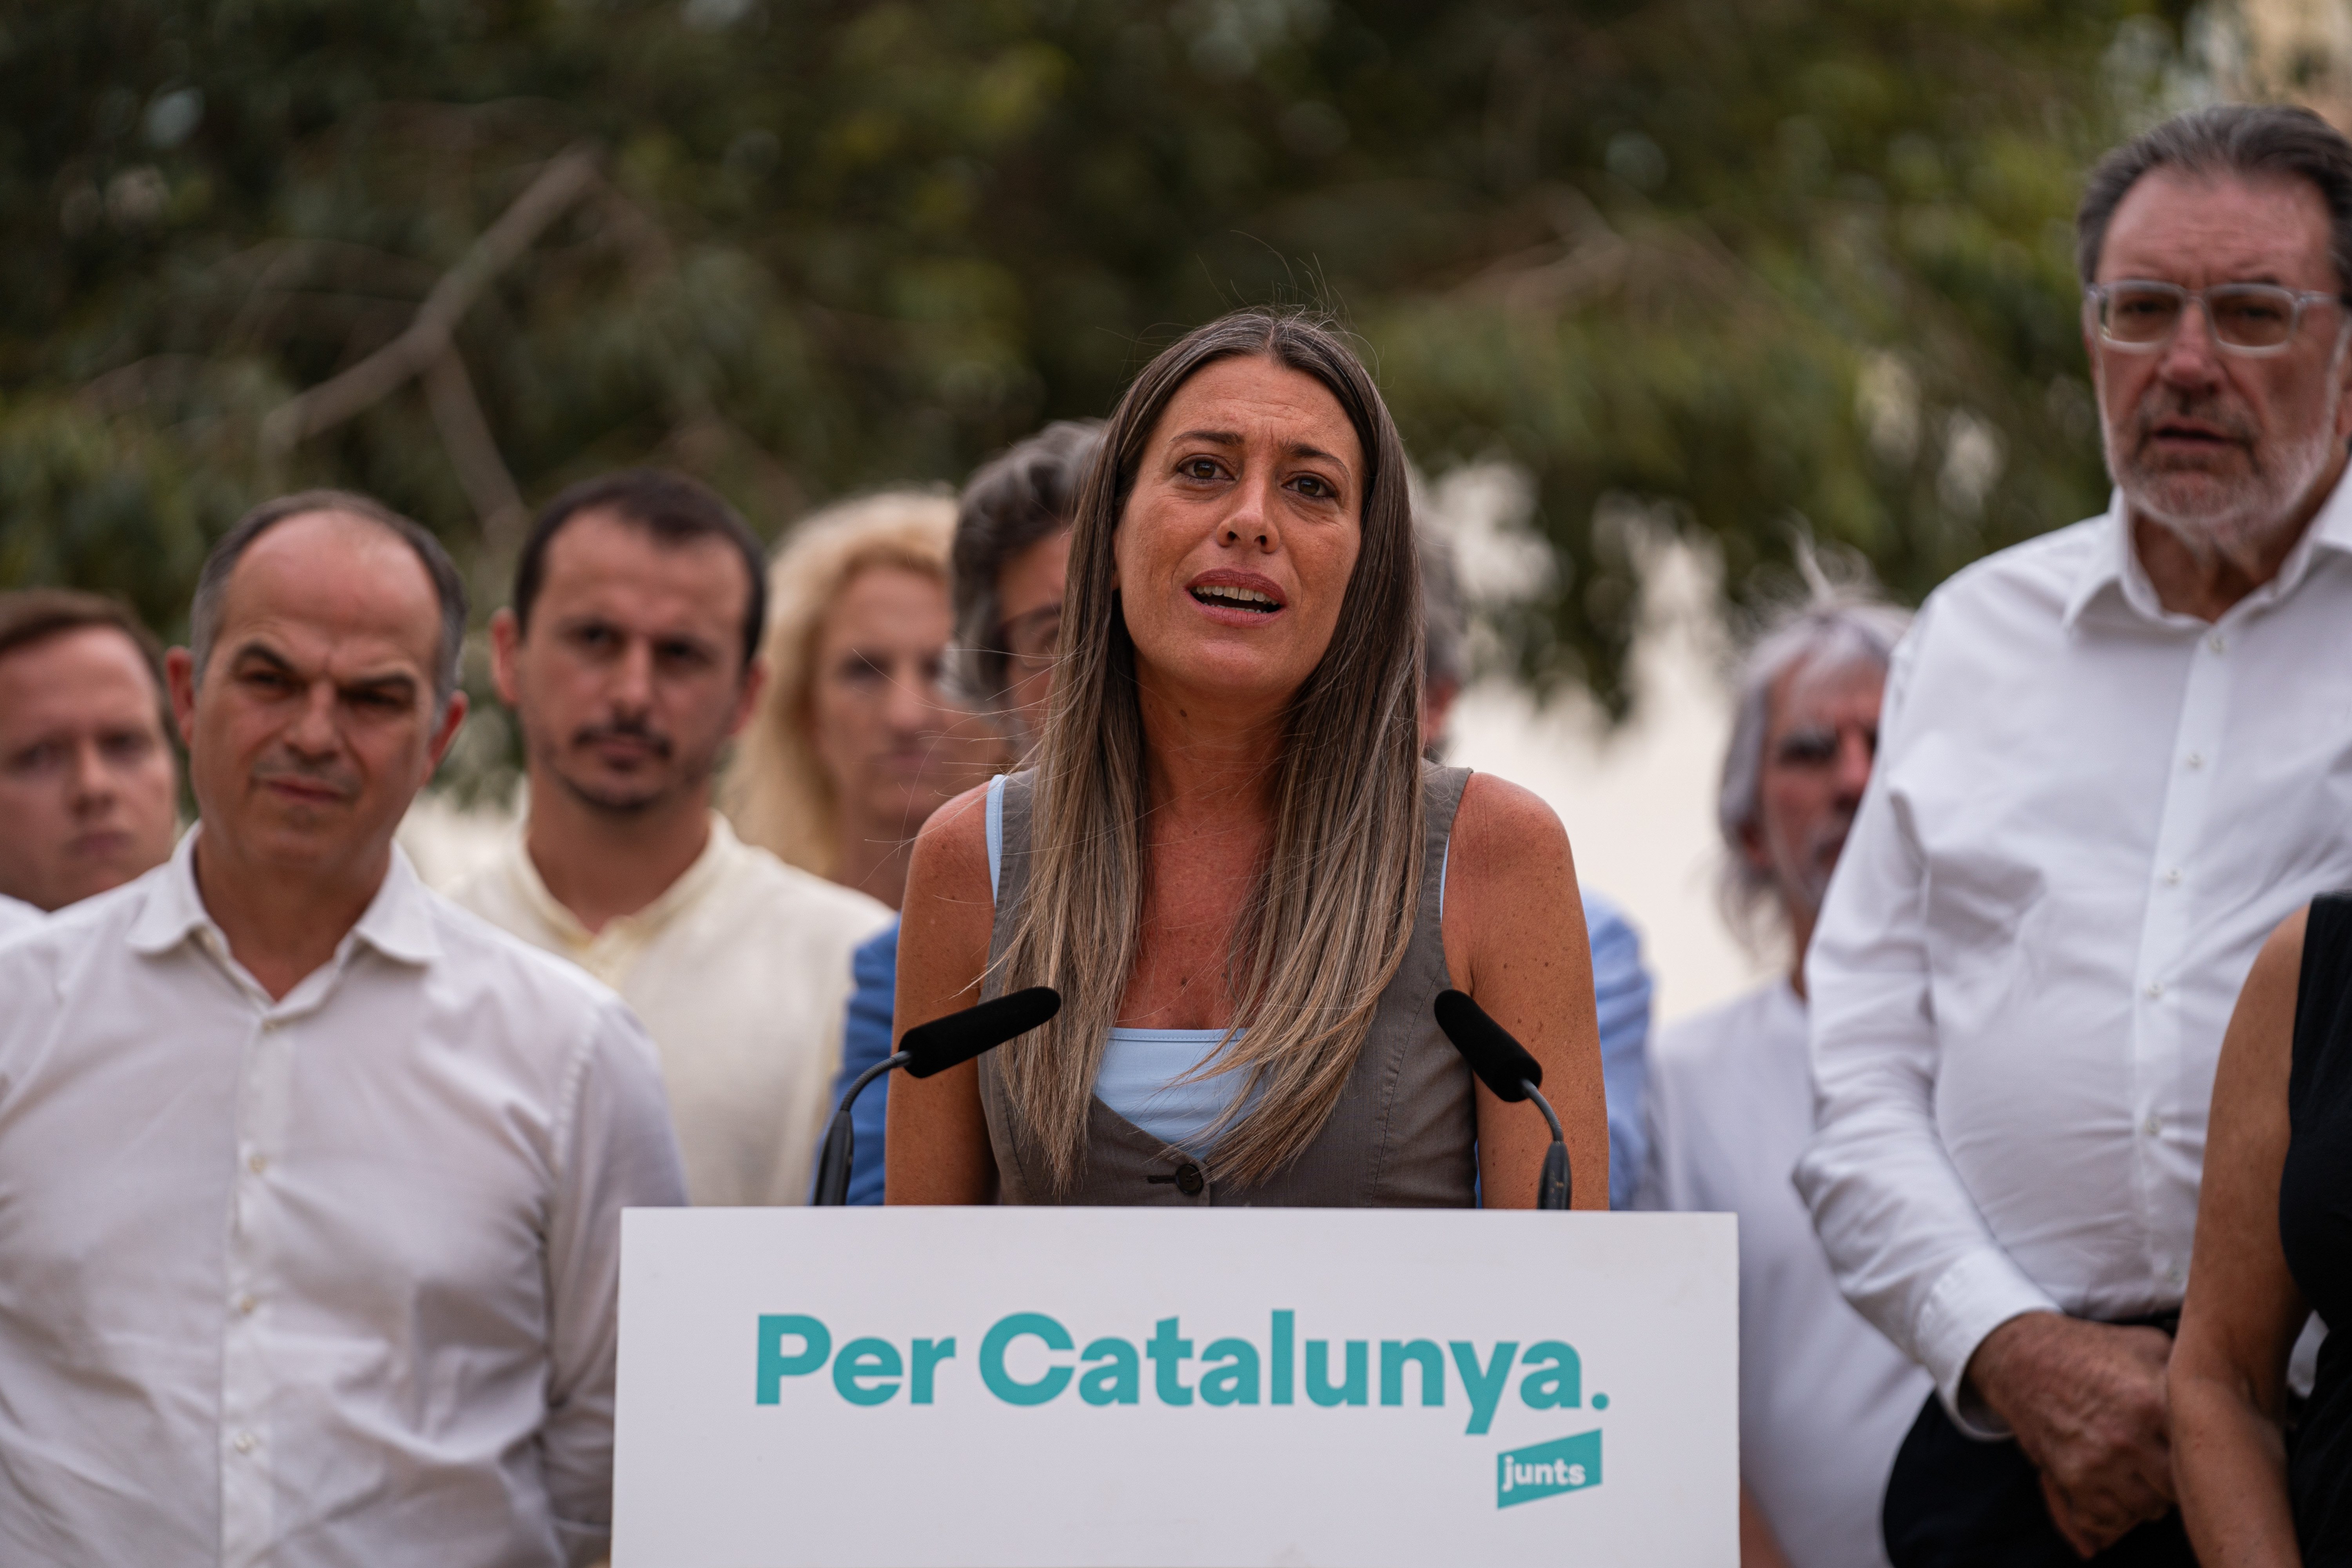 Junts intensifies calls for mobilization: abstention "does not bring independence any closer"